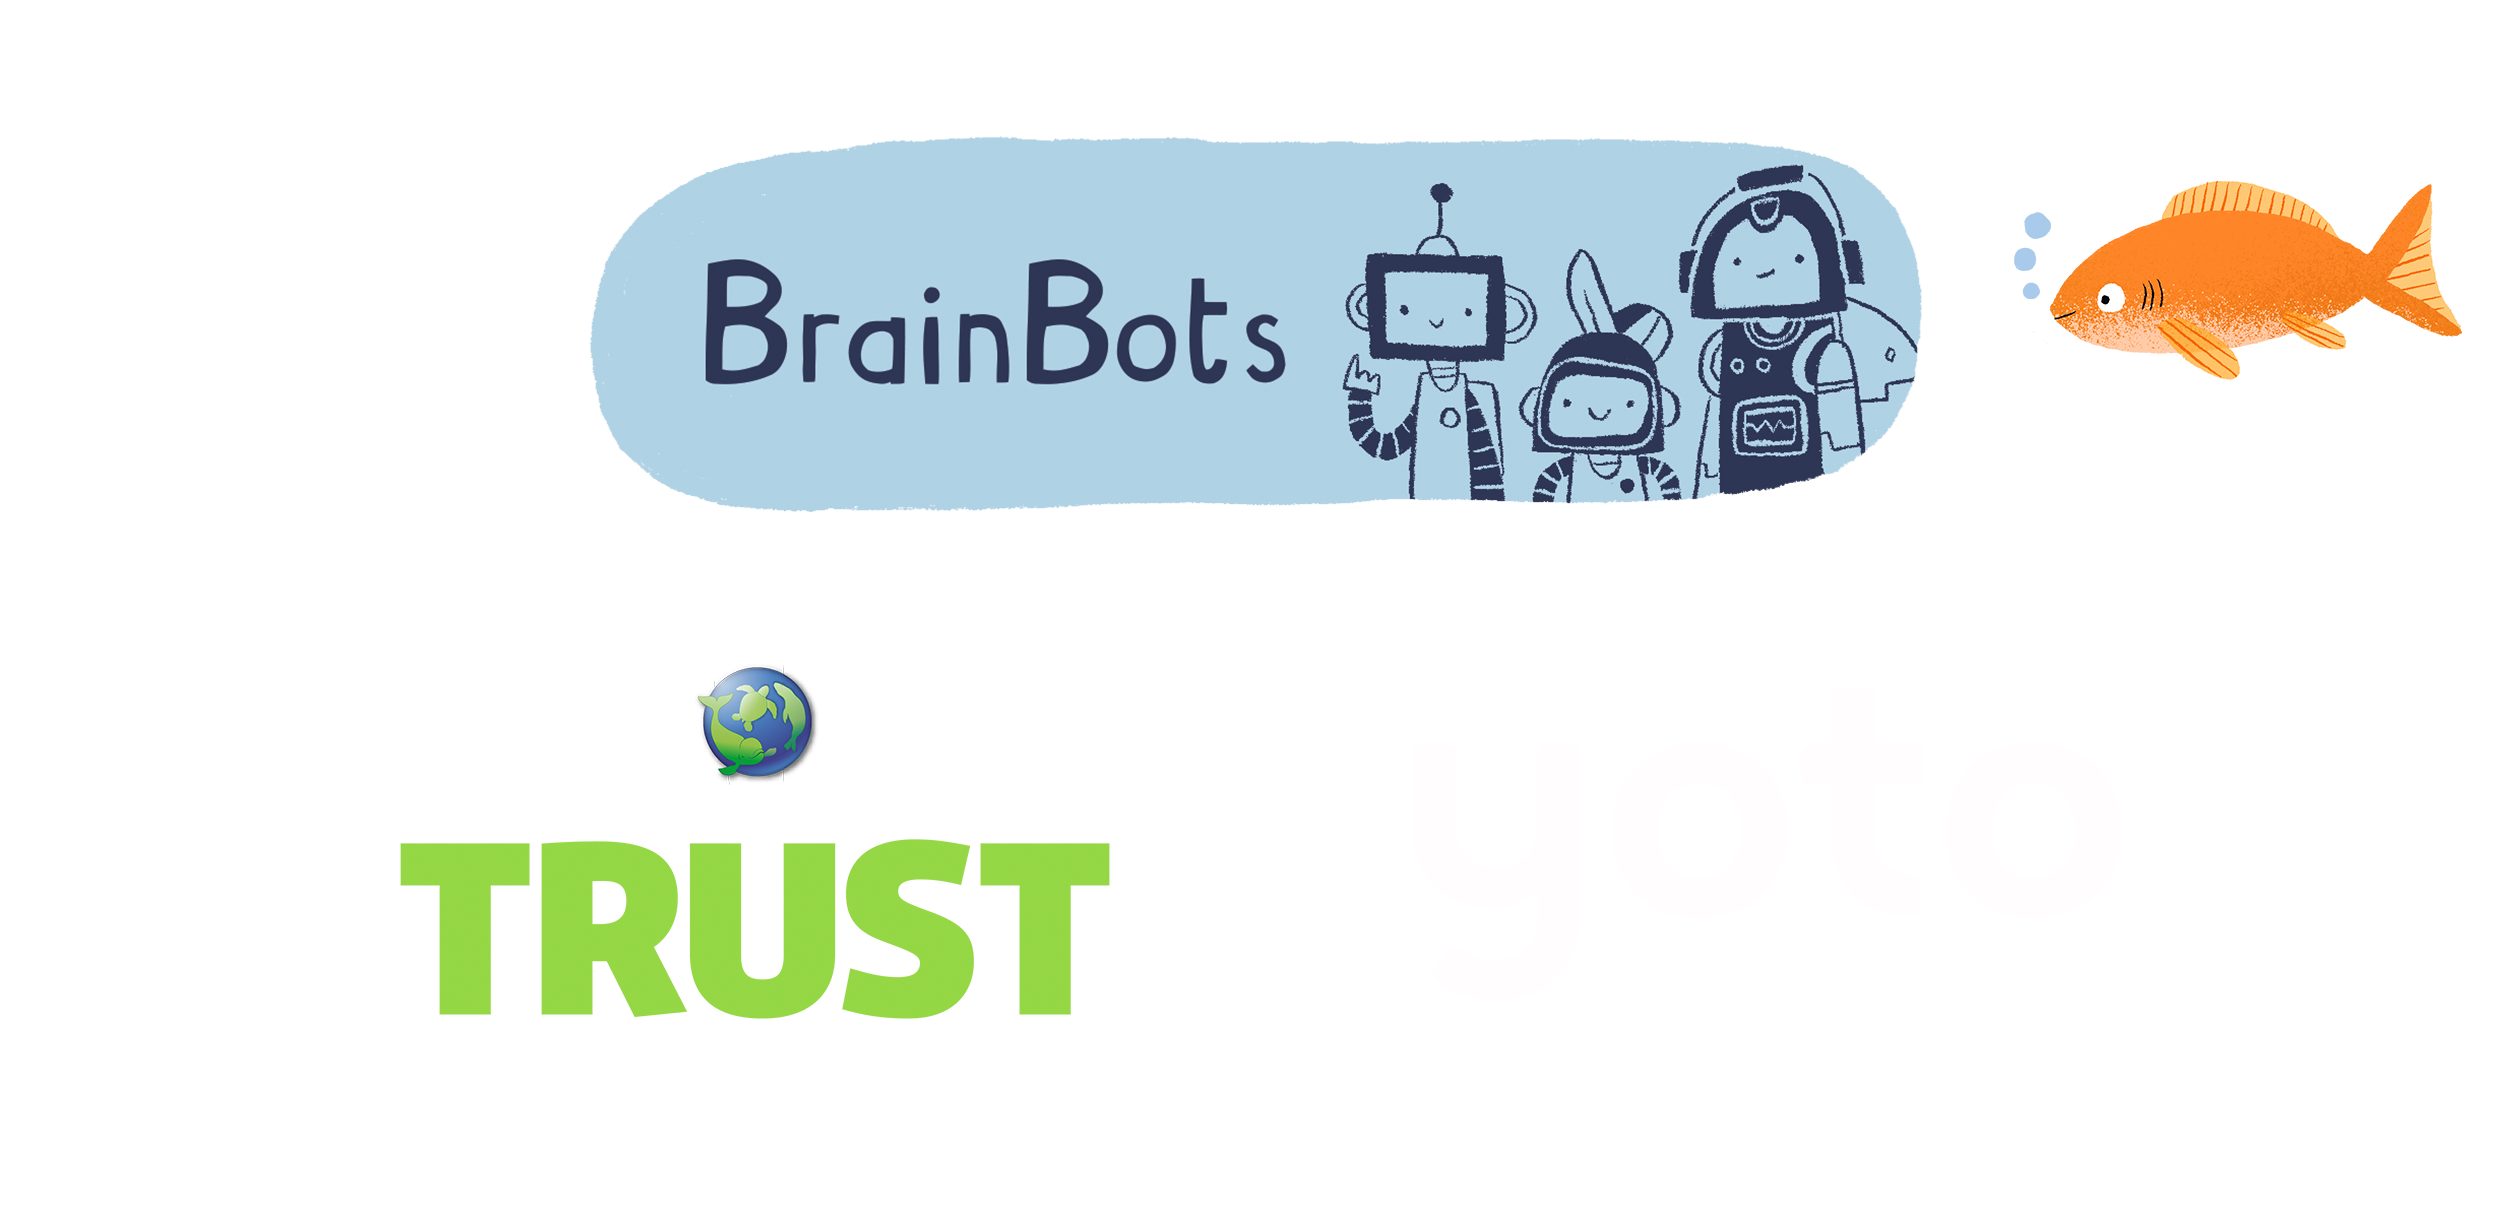 Sealife Trust with Yoto and BrainBots